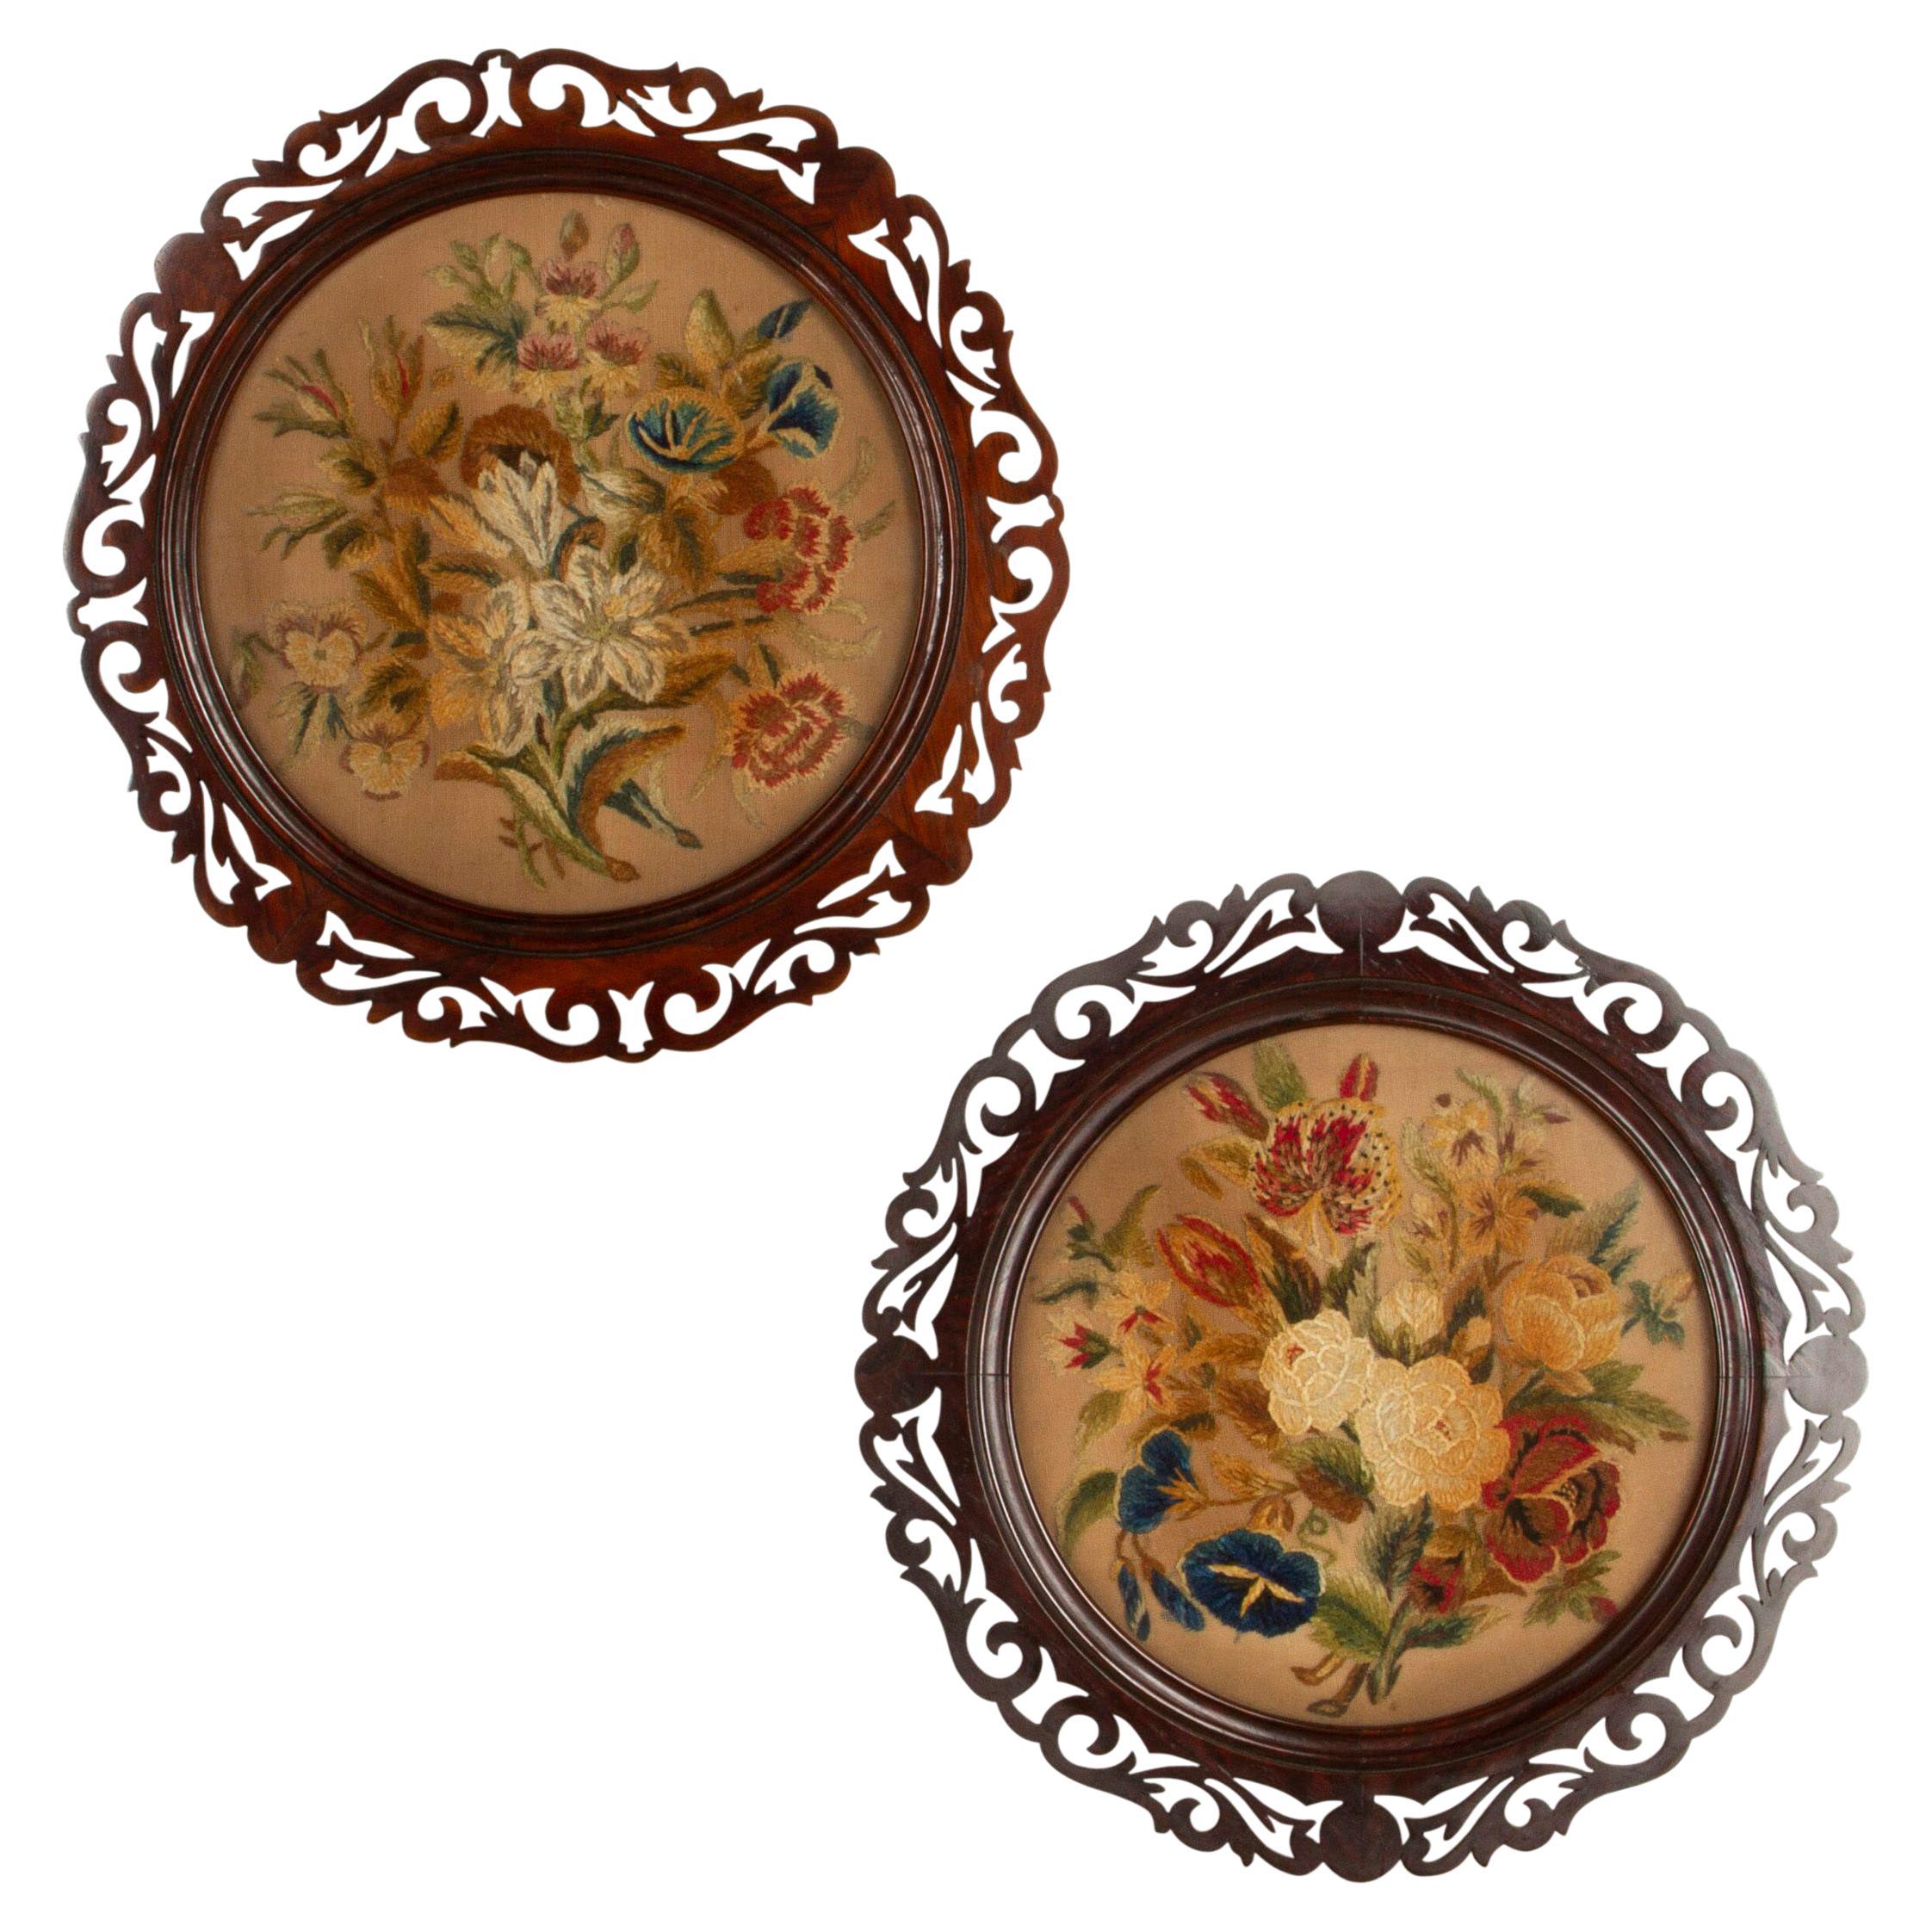 Pair of Framed Circular Floral Needlework Pictures